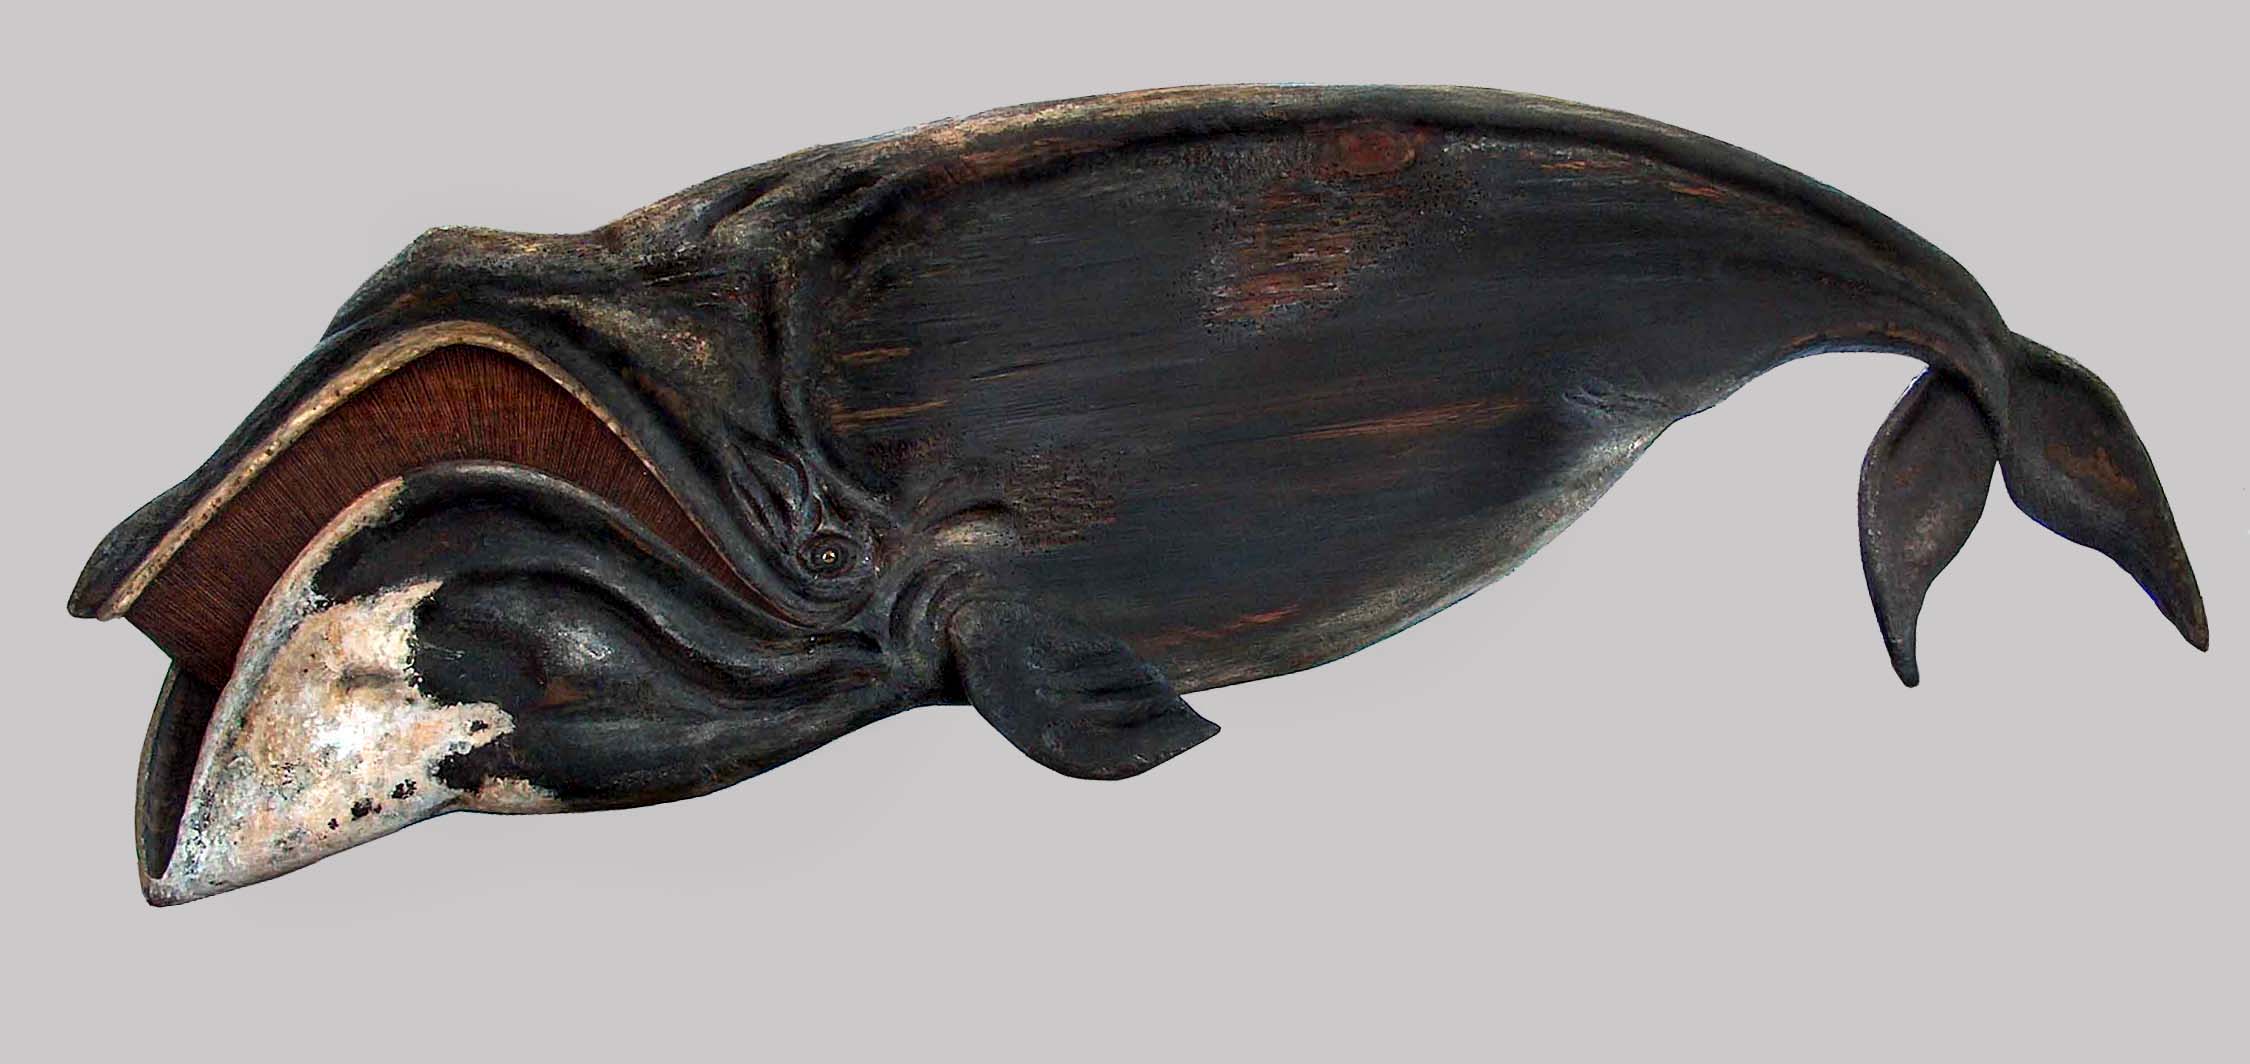 The mouth of the Bowhead Whale is shaped as an archer's bow